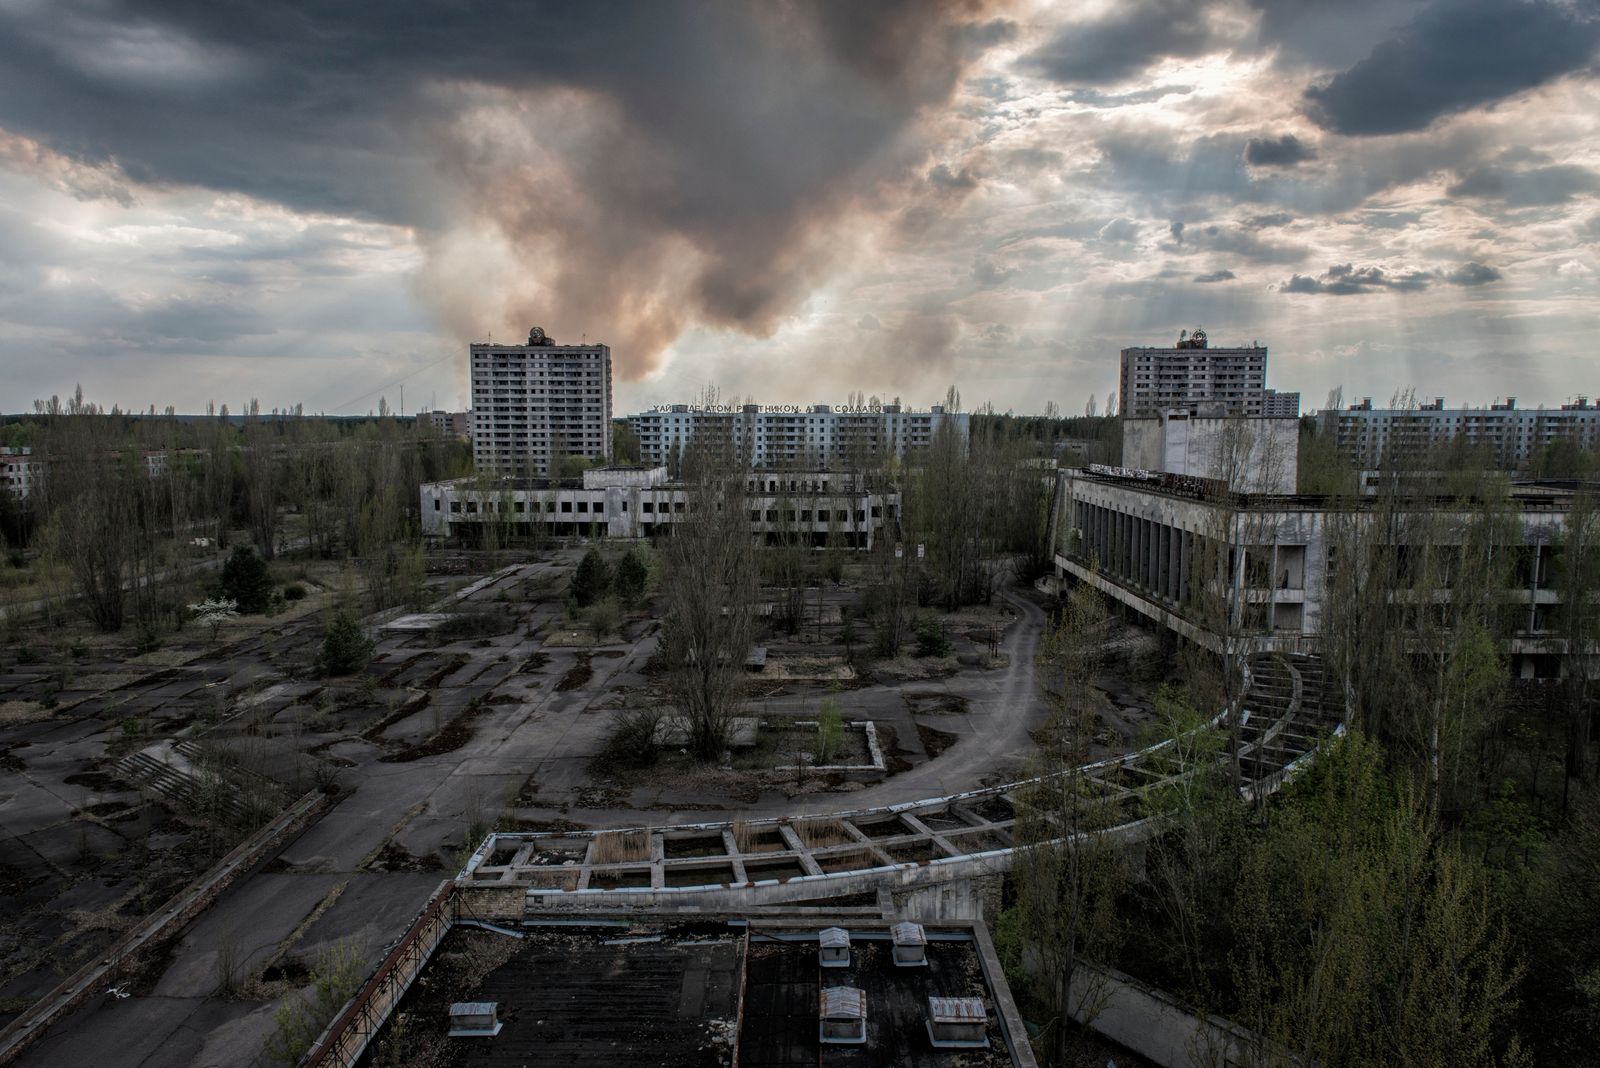 © Pierpaolo Mittica - Image from the The Zone, Life after death in Chernobyl photography project